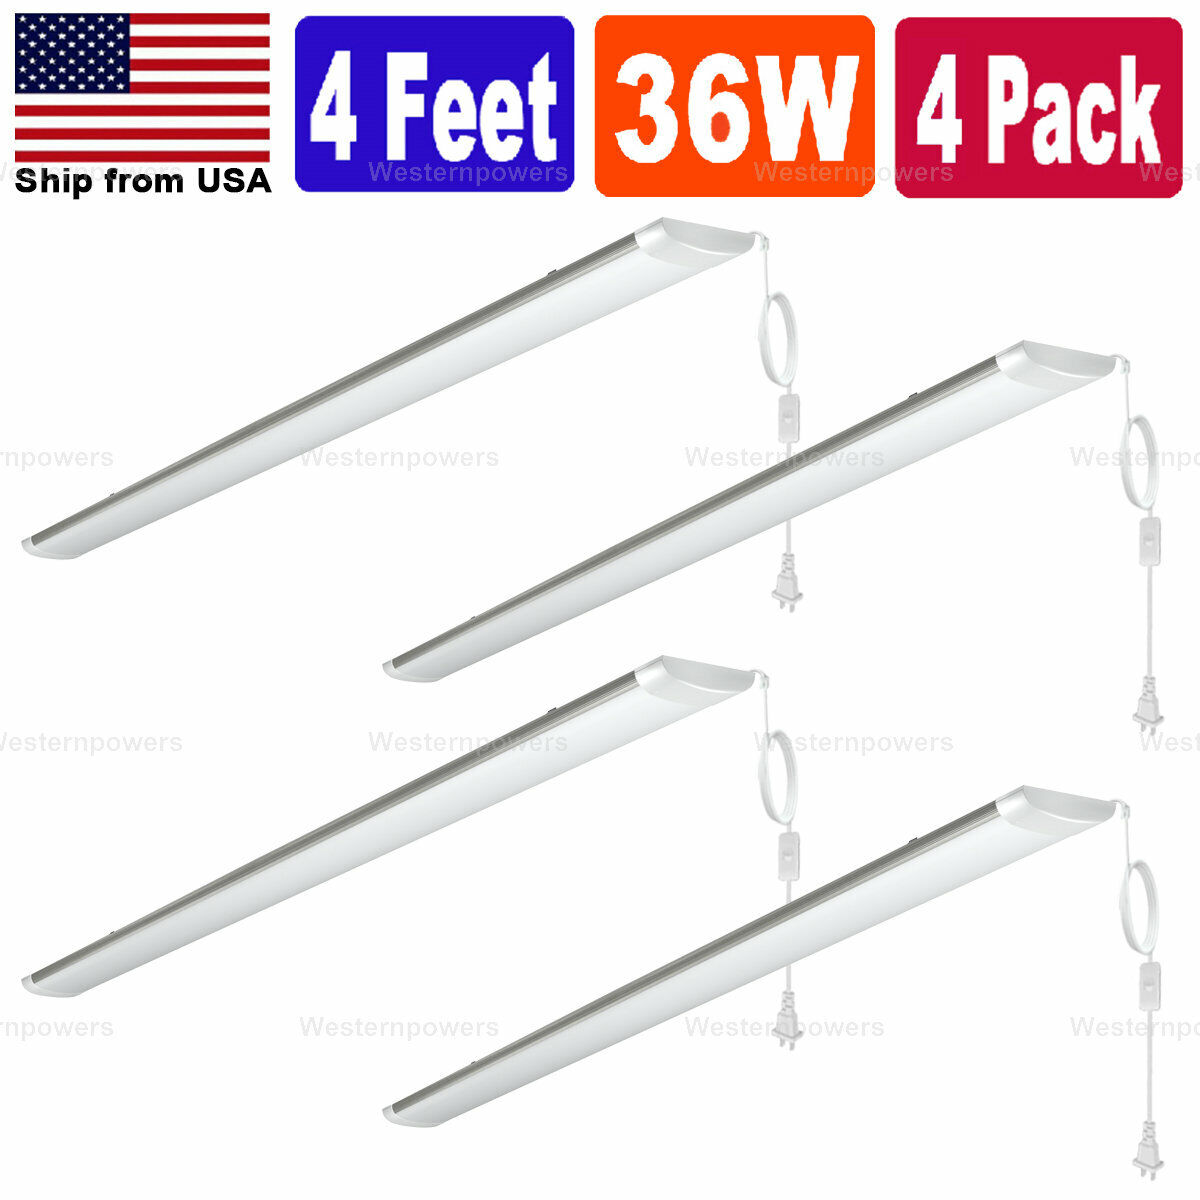 4 Pack LED Shop Light Utility Ceiling Garage Workshop Easy Mount LED 36W (144W) westernpowers Does Not Apply